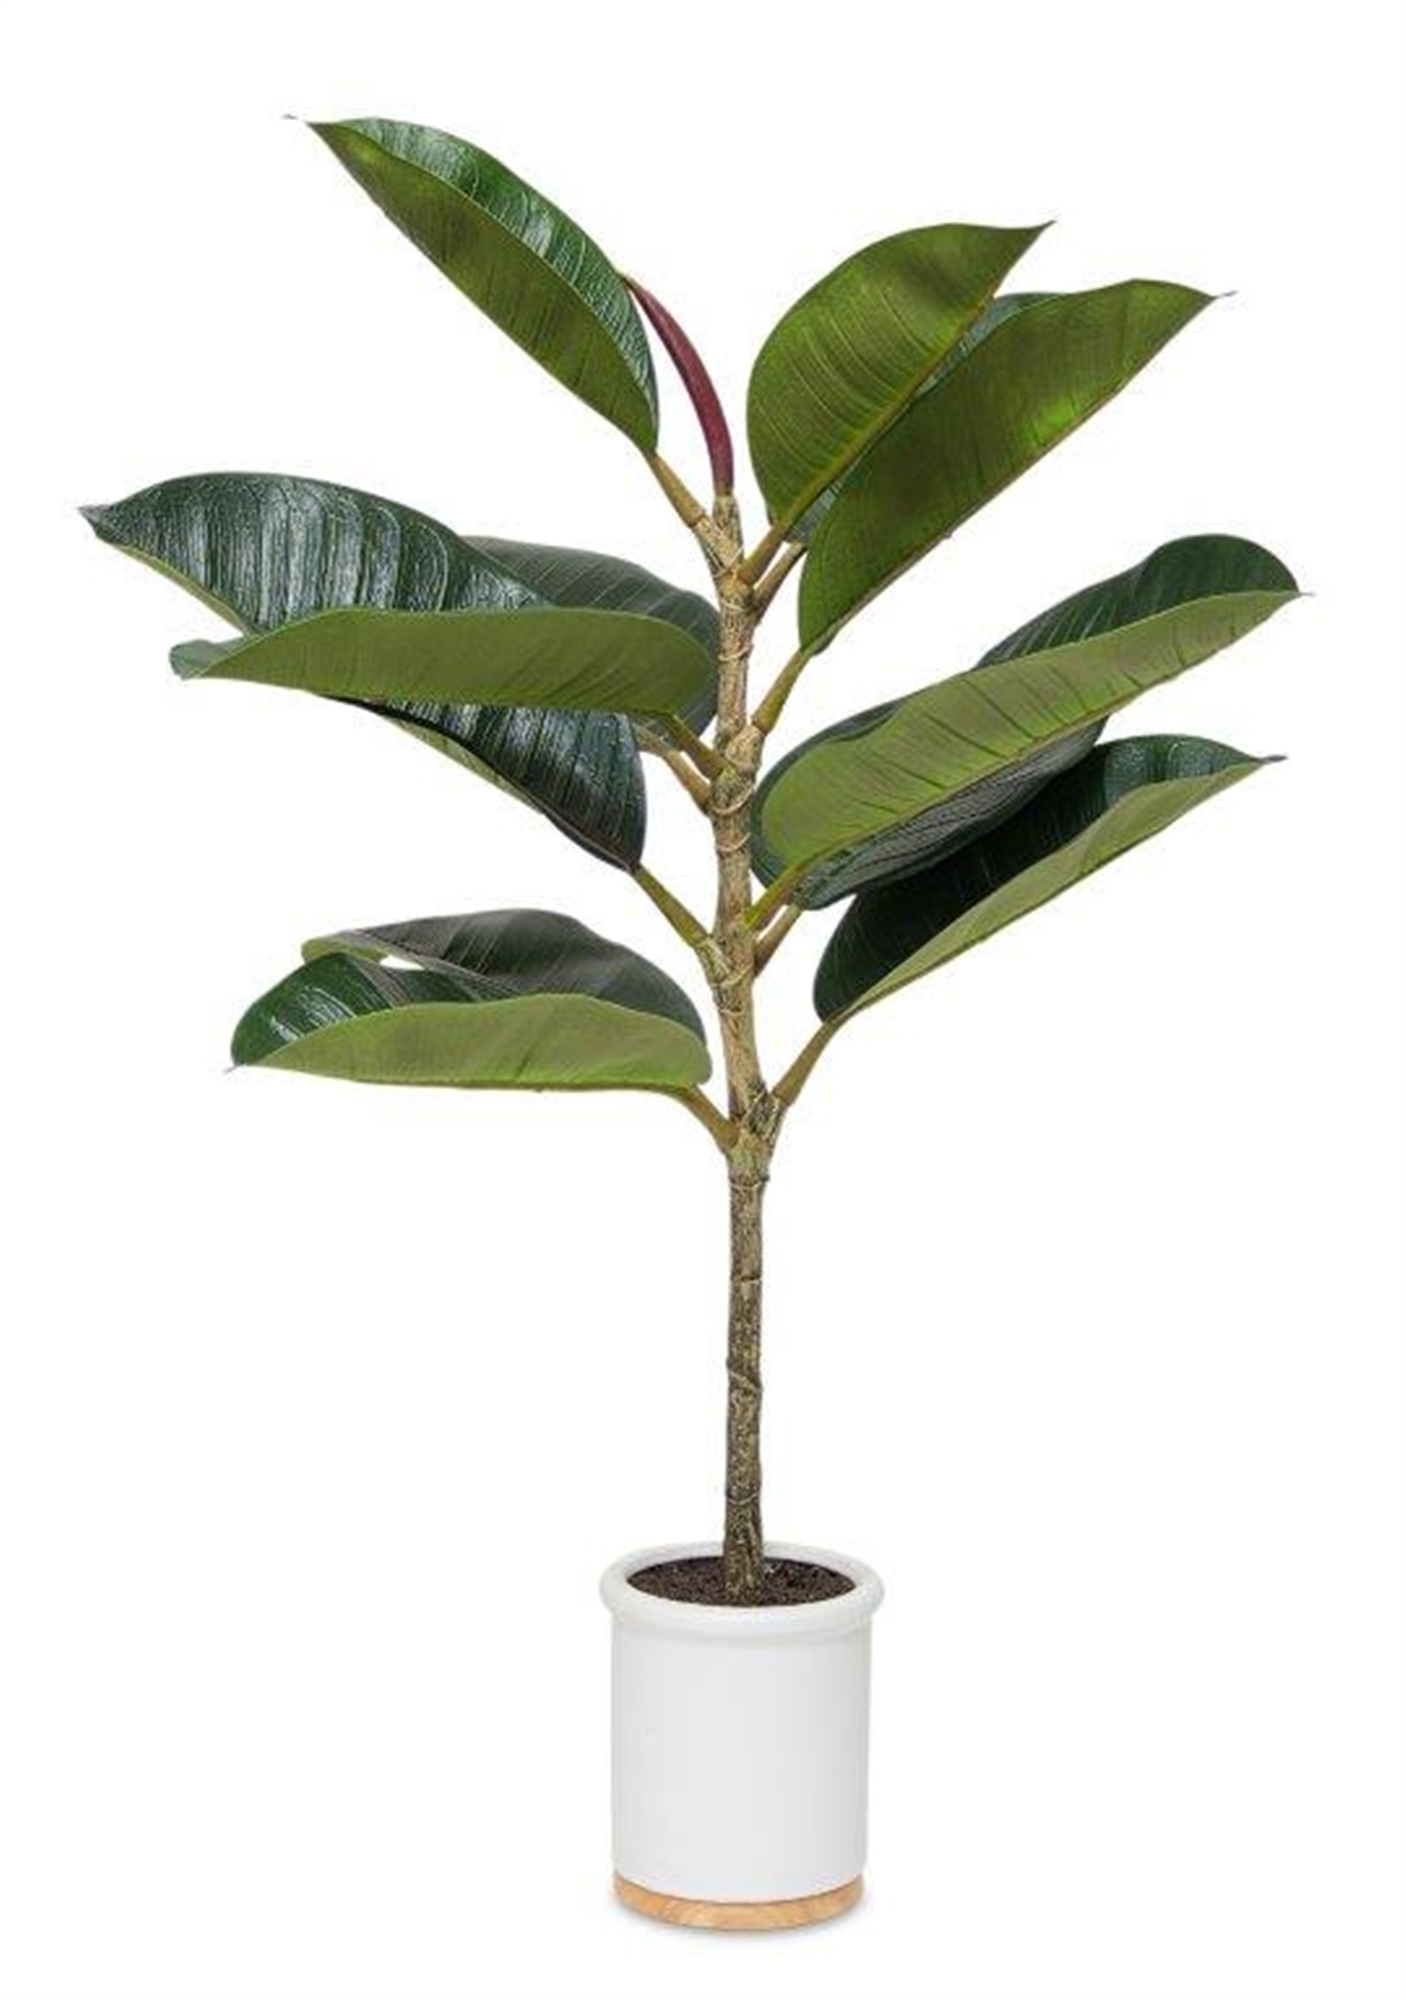 Potted Rubber Plant 30"H Polyester/Ceramic